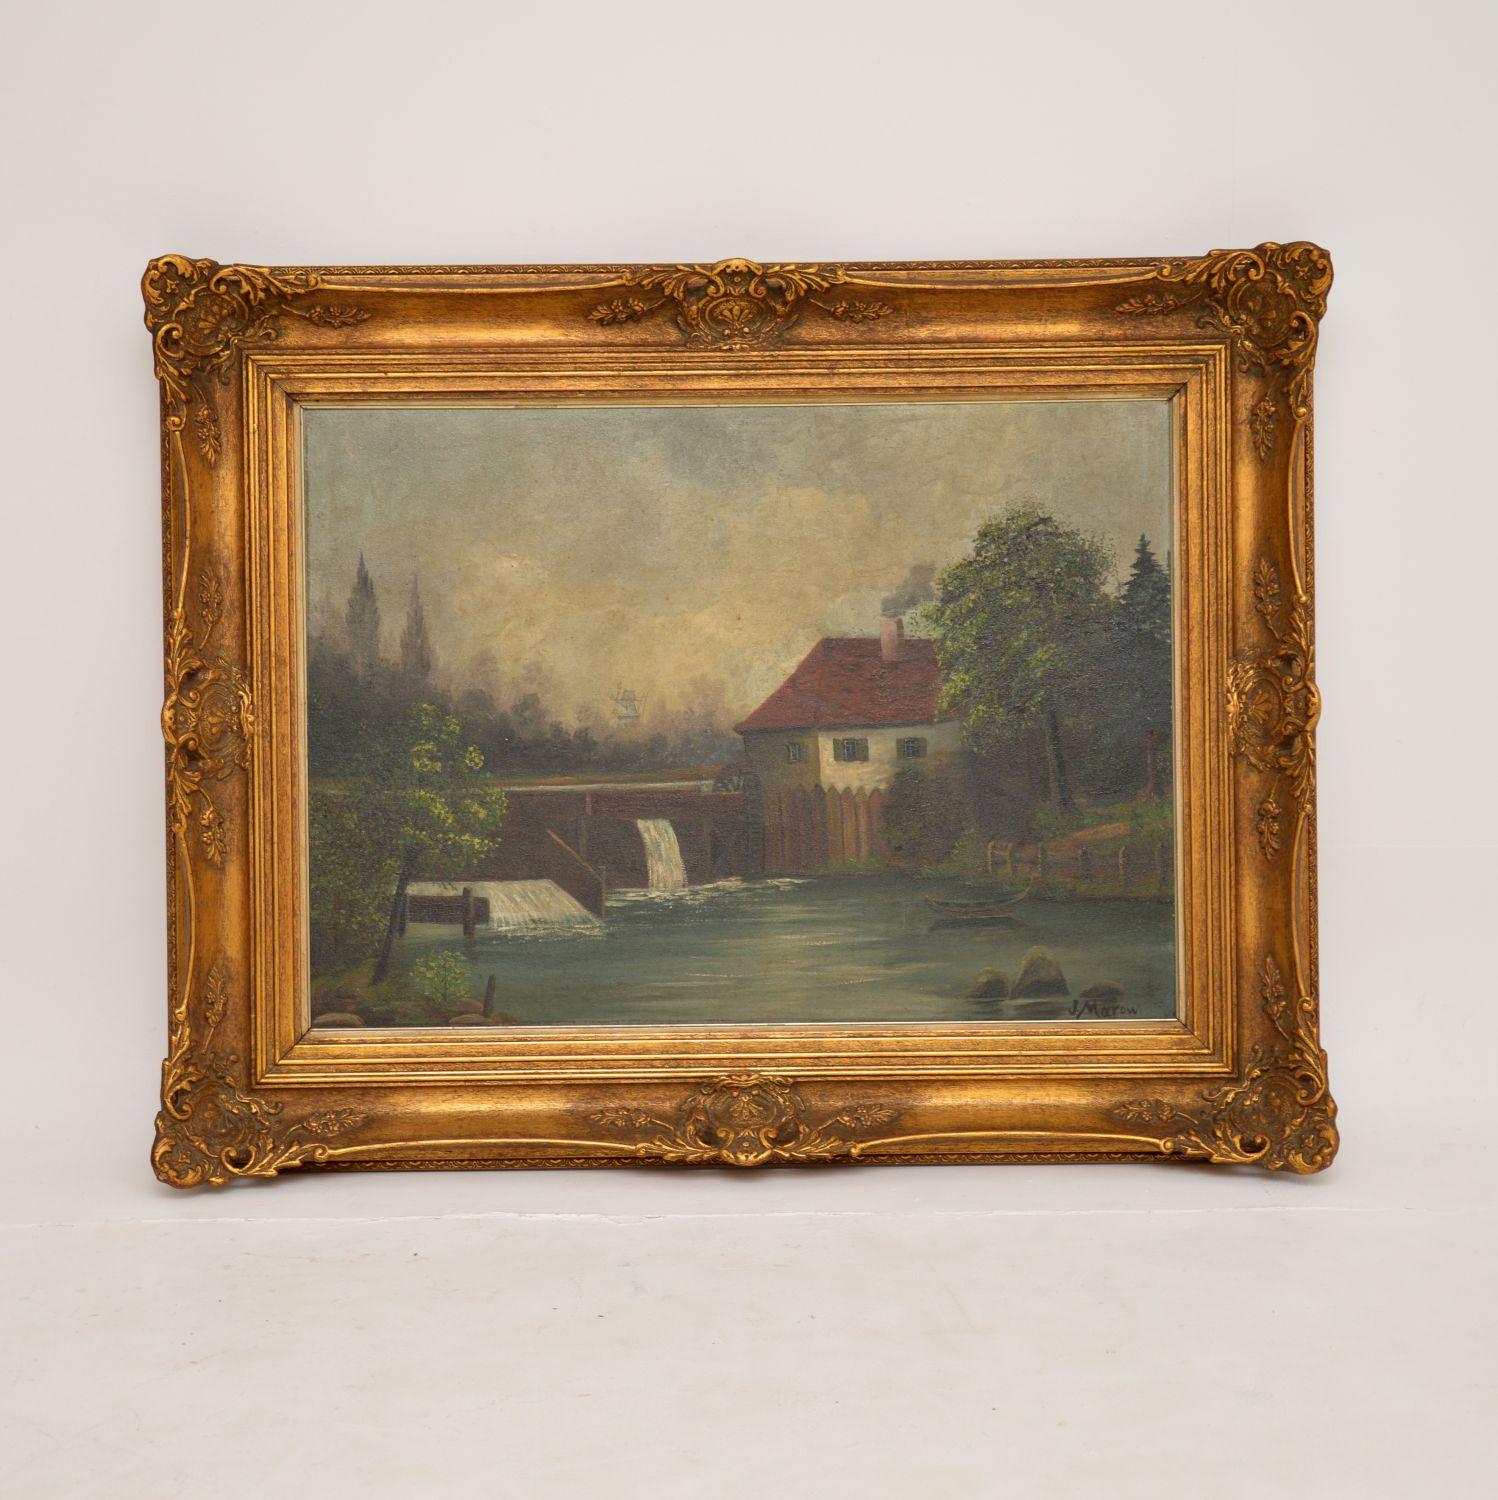 A beautiful, large and impressive antique landscape oil painting, this dates from around the 19th century.

It depicts a lovely countryside scene of a water mill. It is very well executed, with lovely details and gorgeous, subtle colour